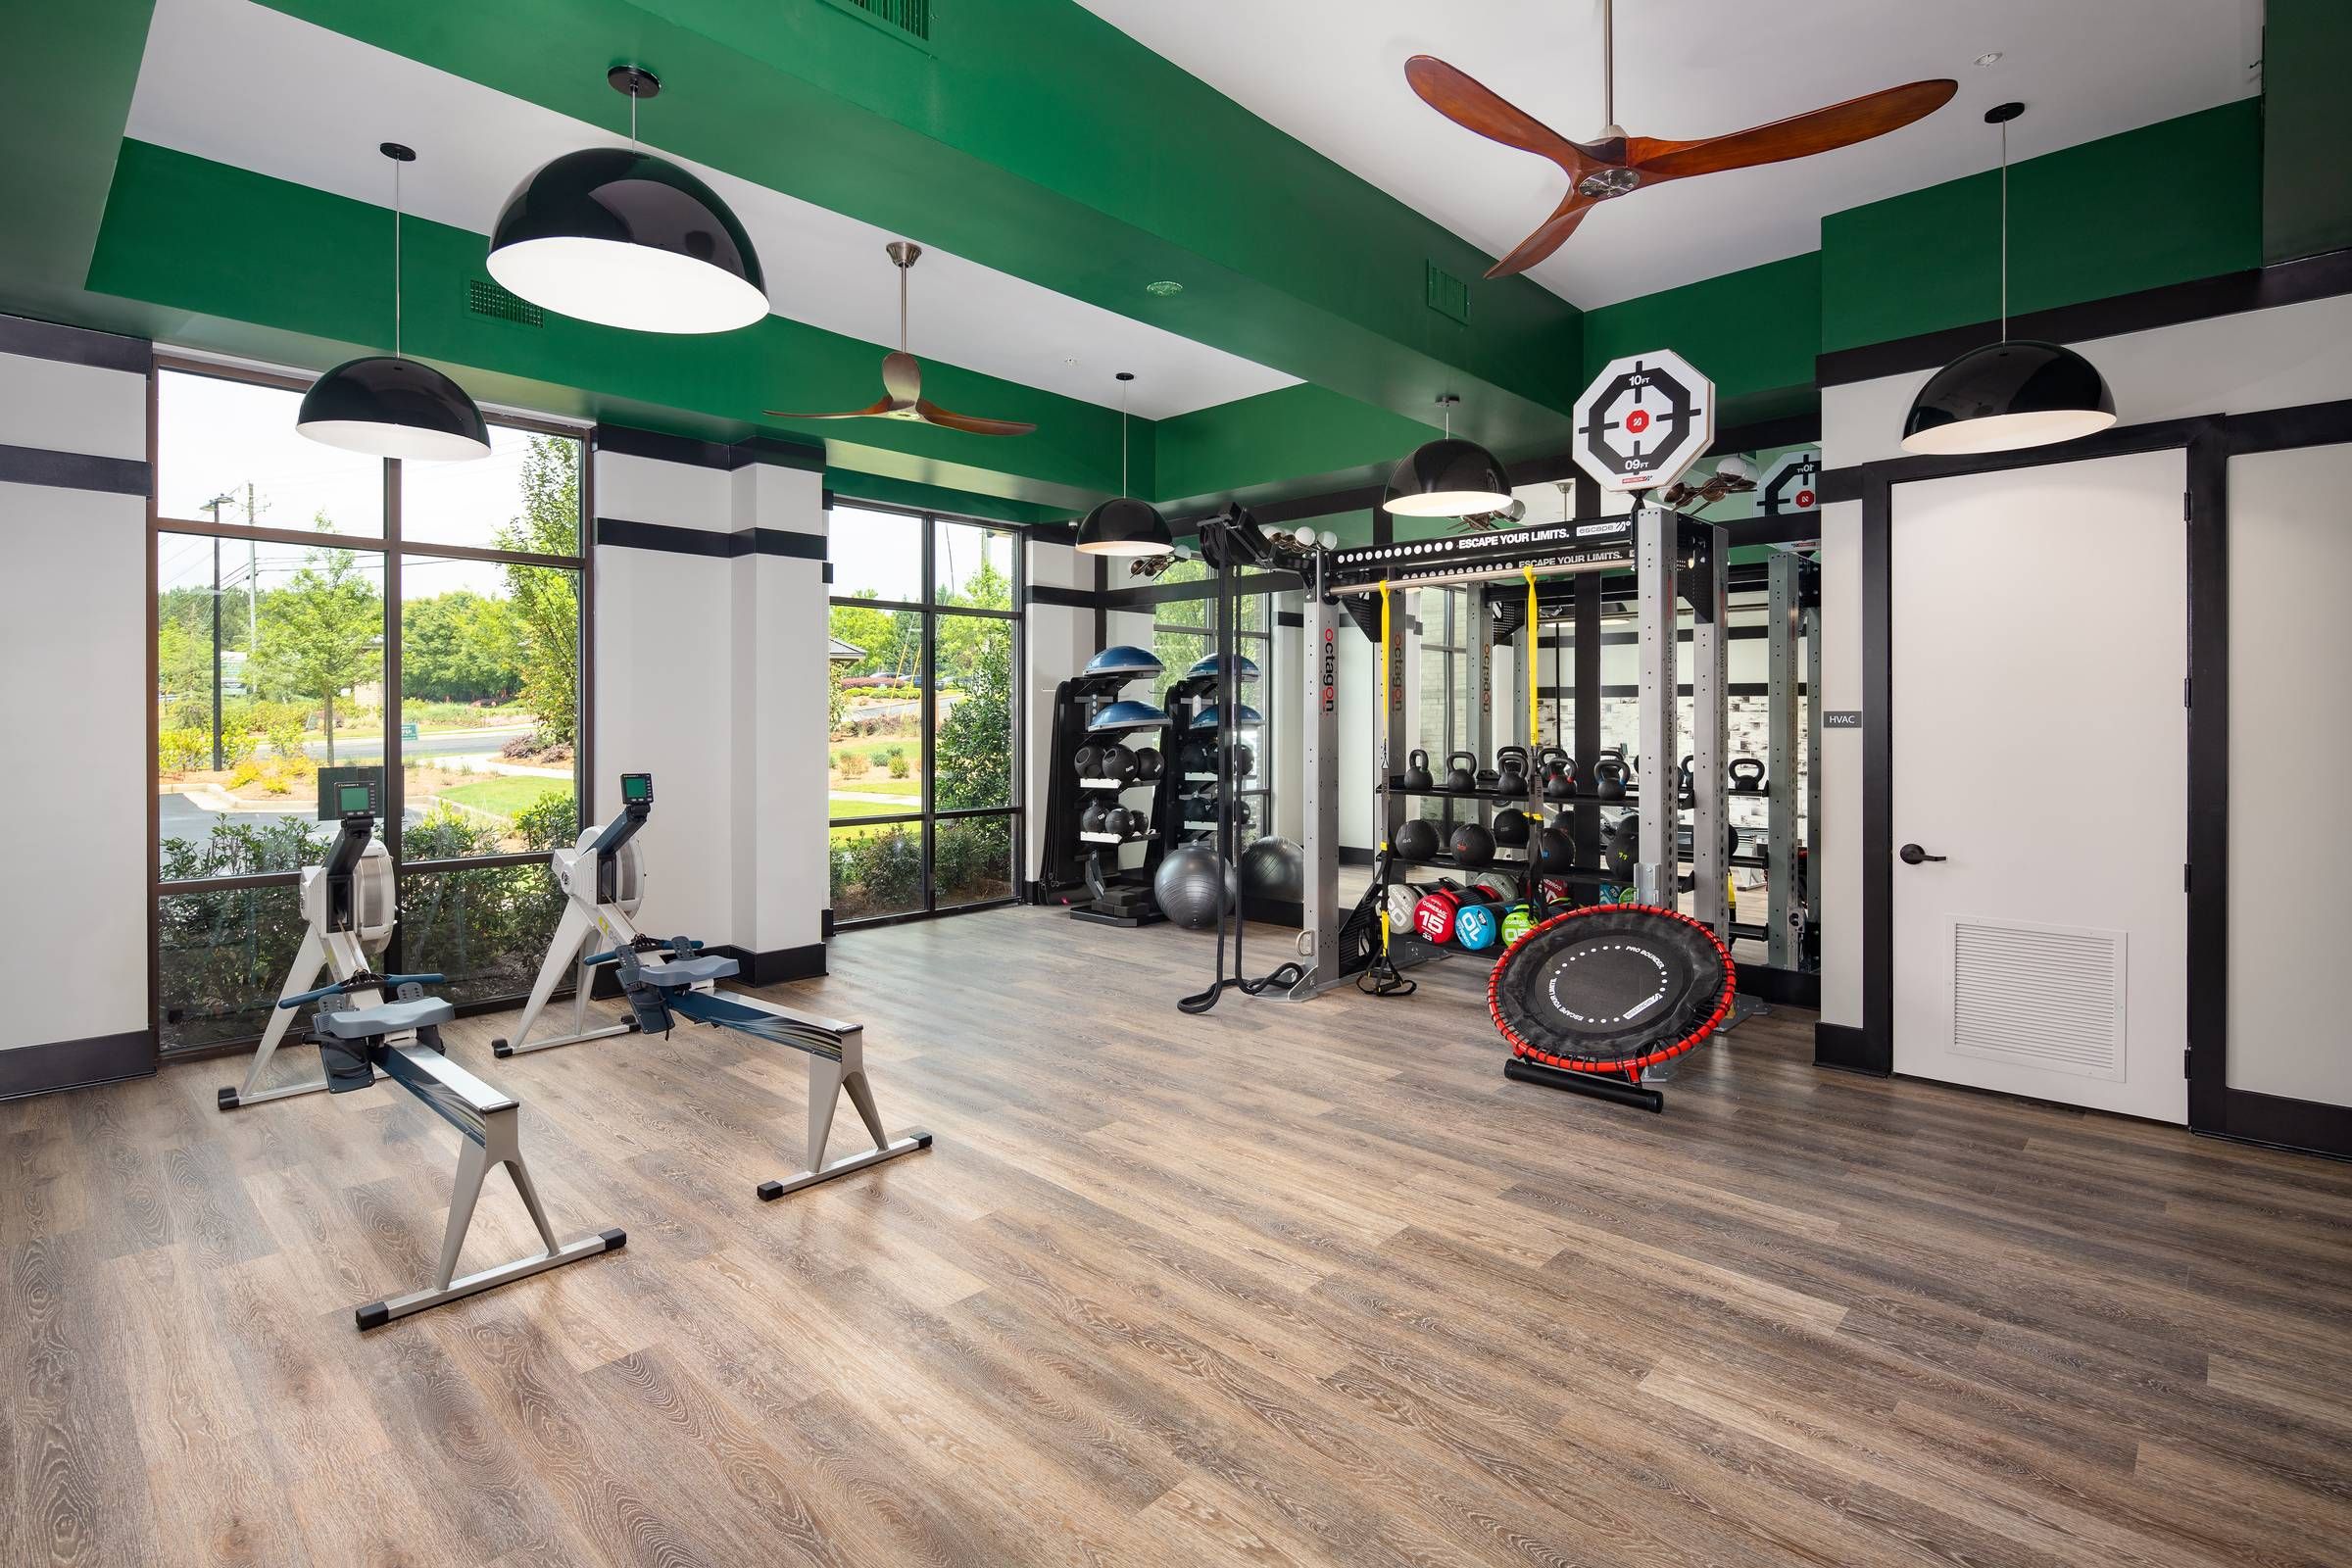 A well-equipped fitness center at Alta Sugarloaf with green accent walls, large windows, and a variety of exercise equipment.